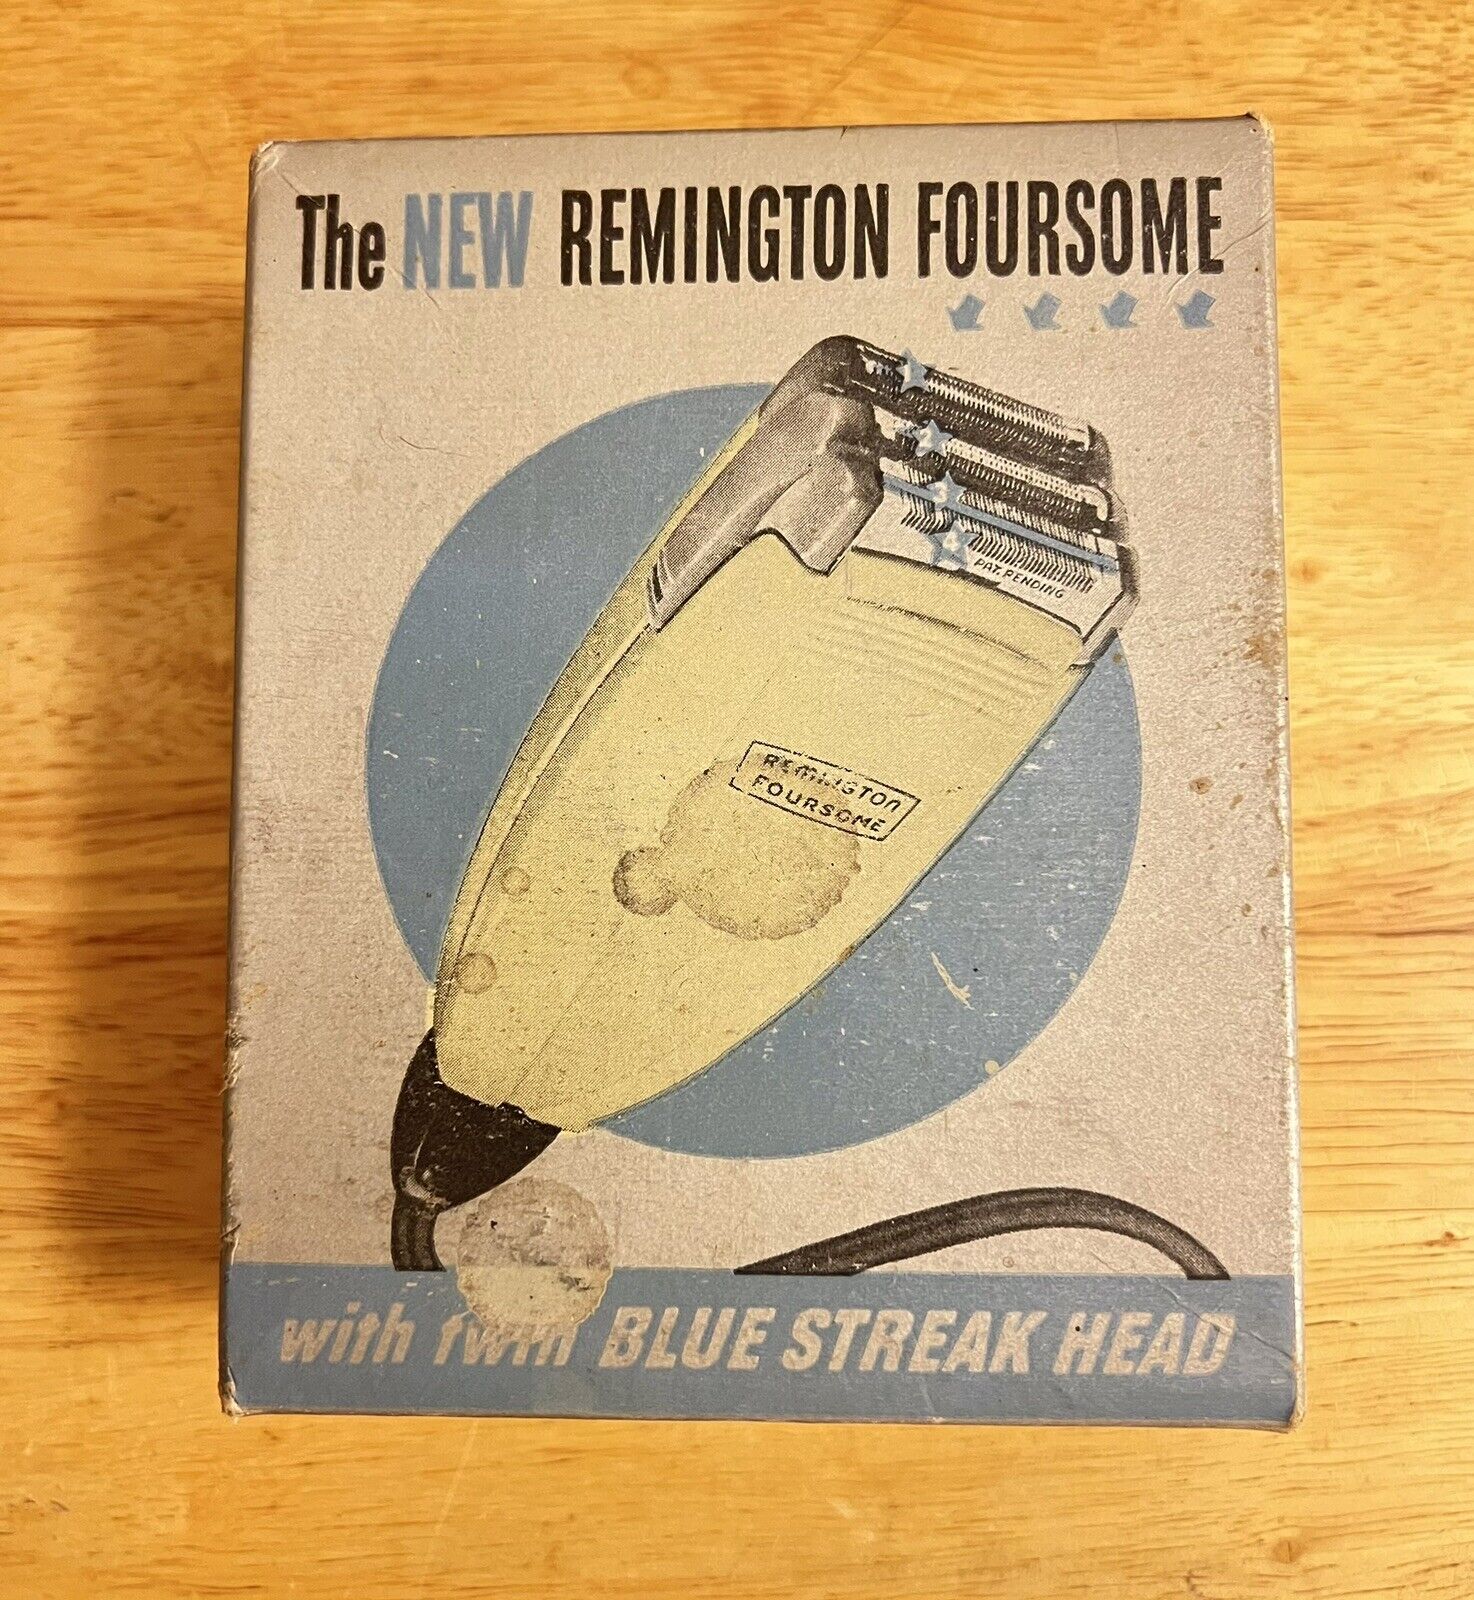 VINTAGE 1941 REMINGTON FOURSOME WORKING ELECTRIC SHAVER IN THE BOX